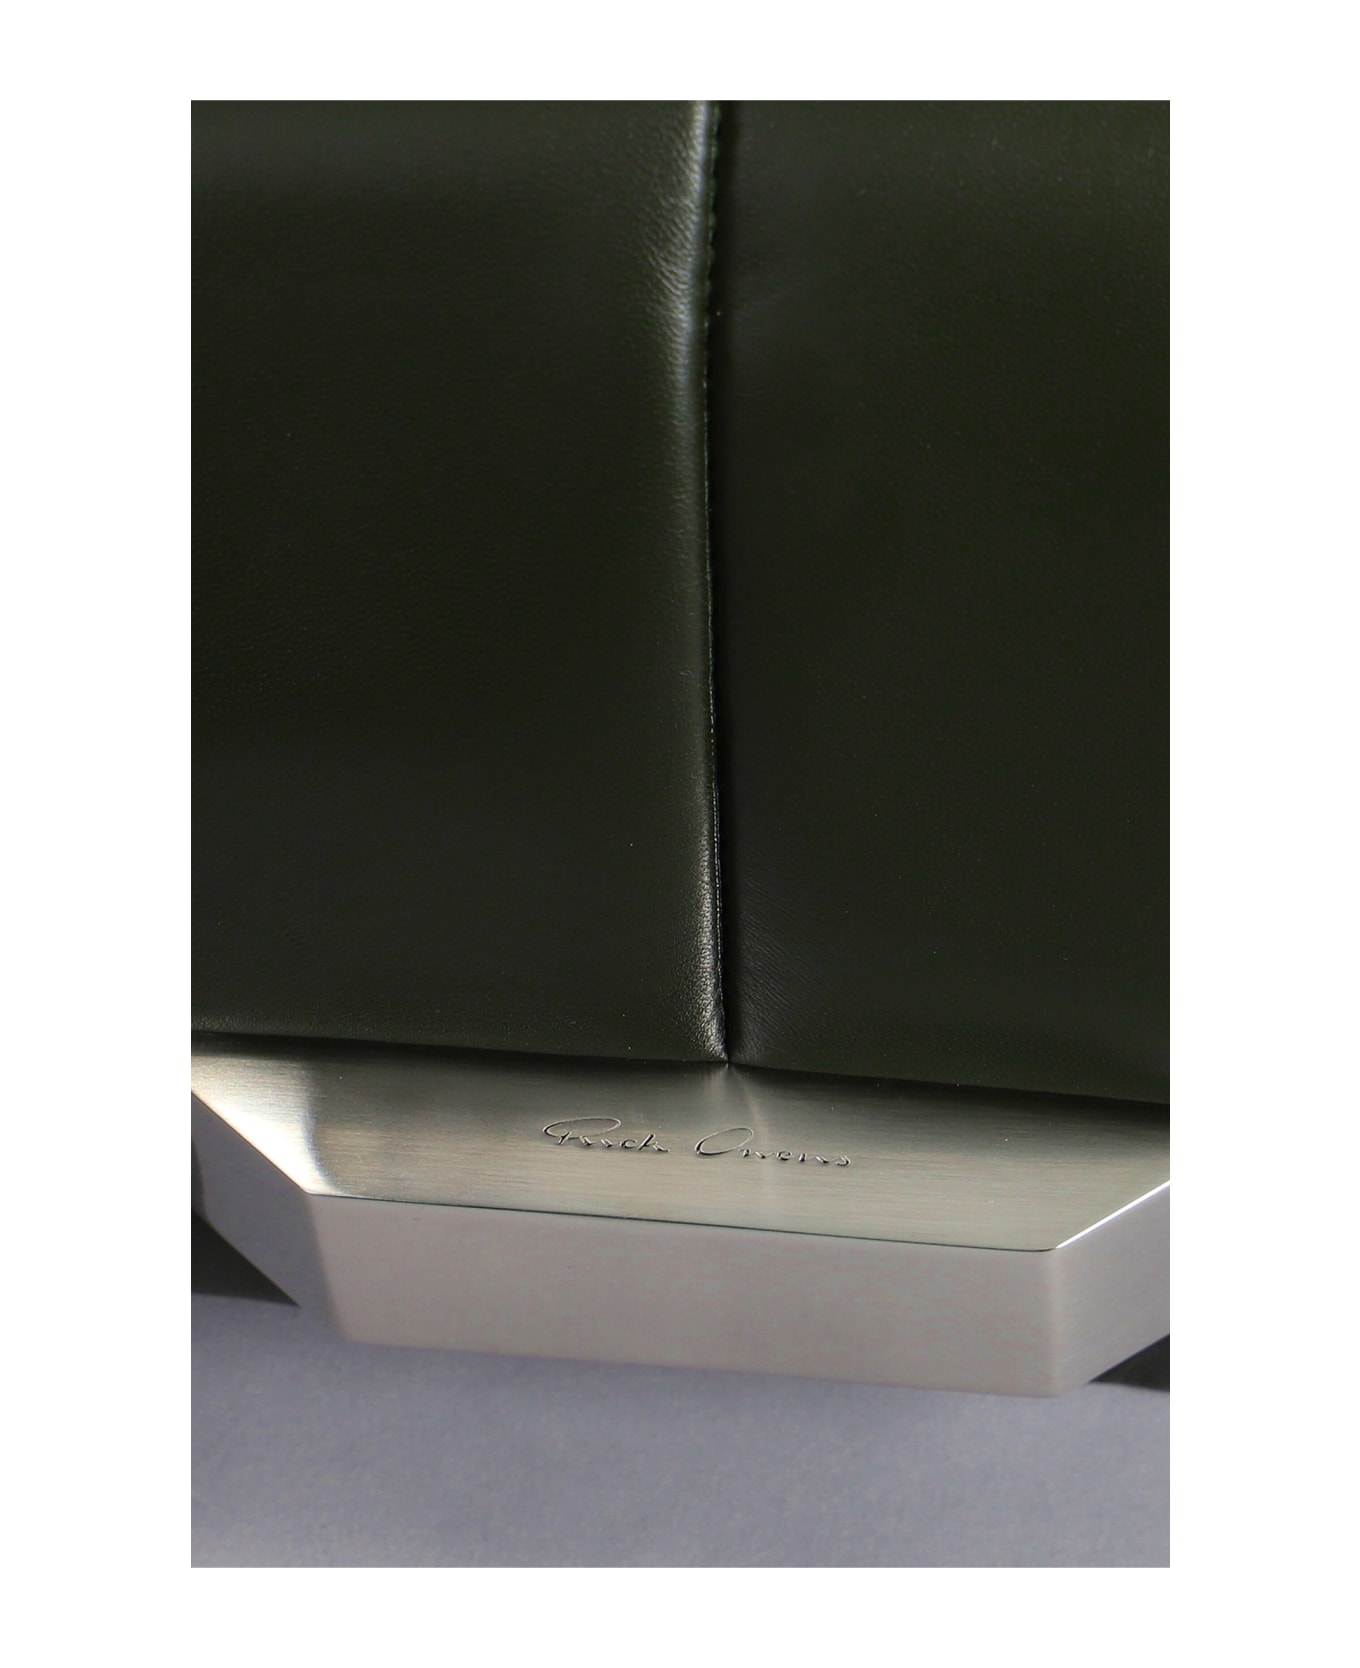 Rick Owens Clutch In Green Leather - green